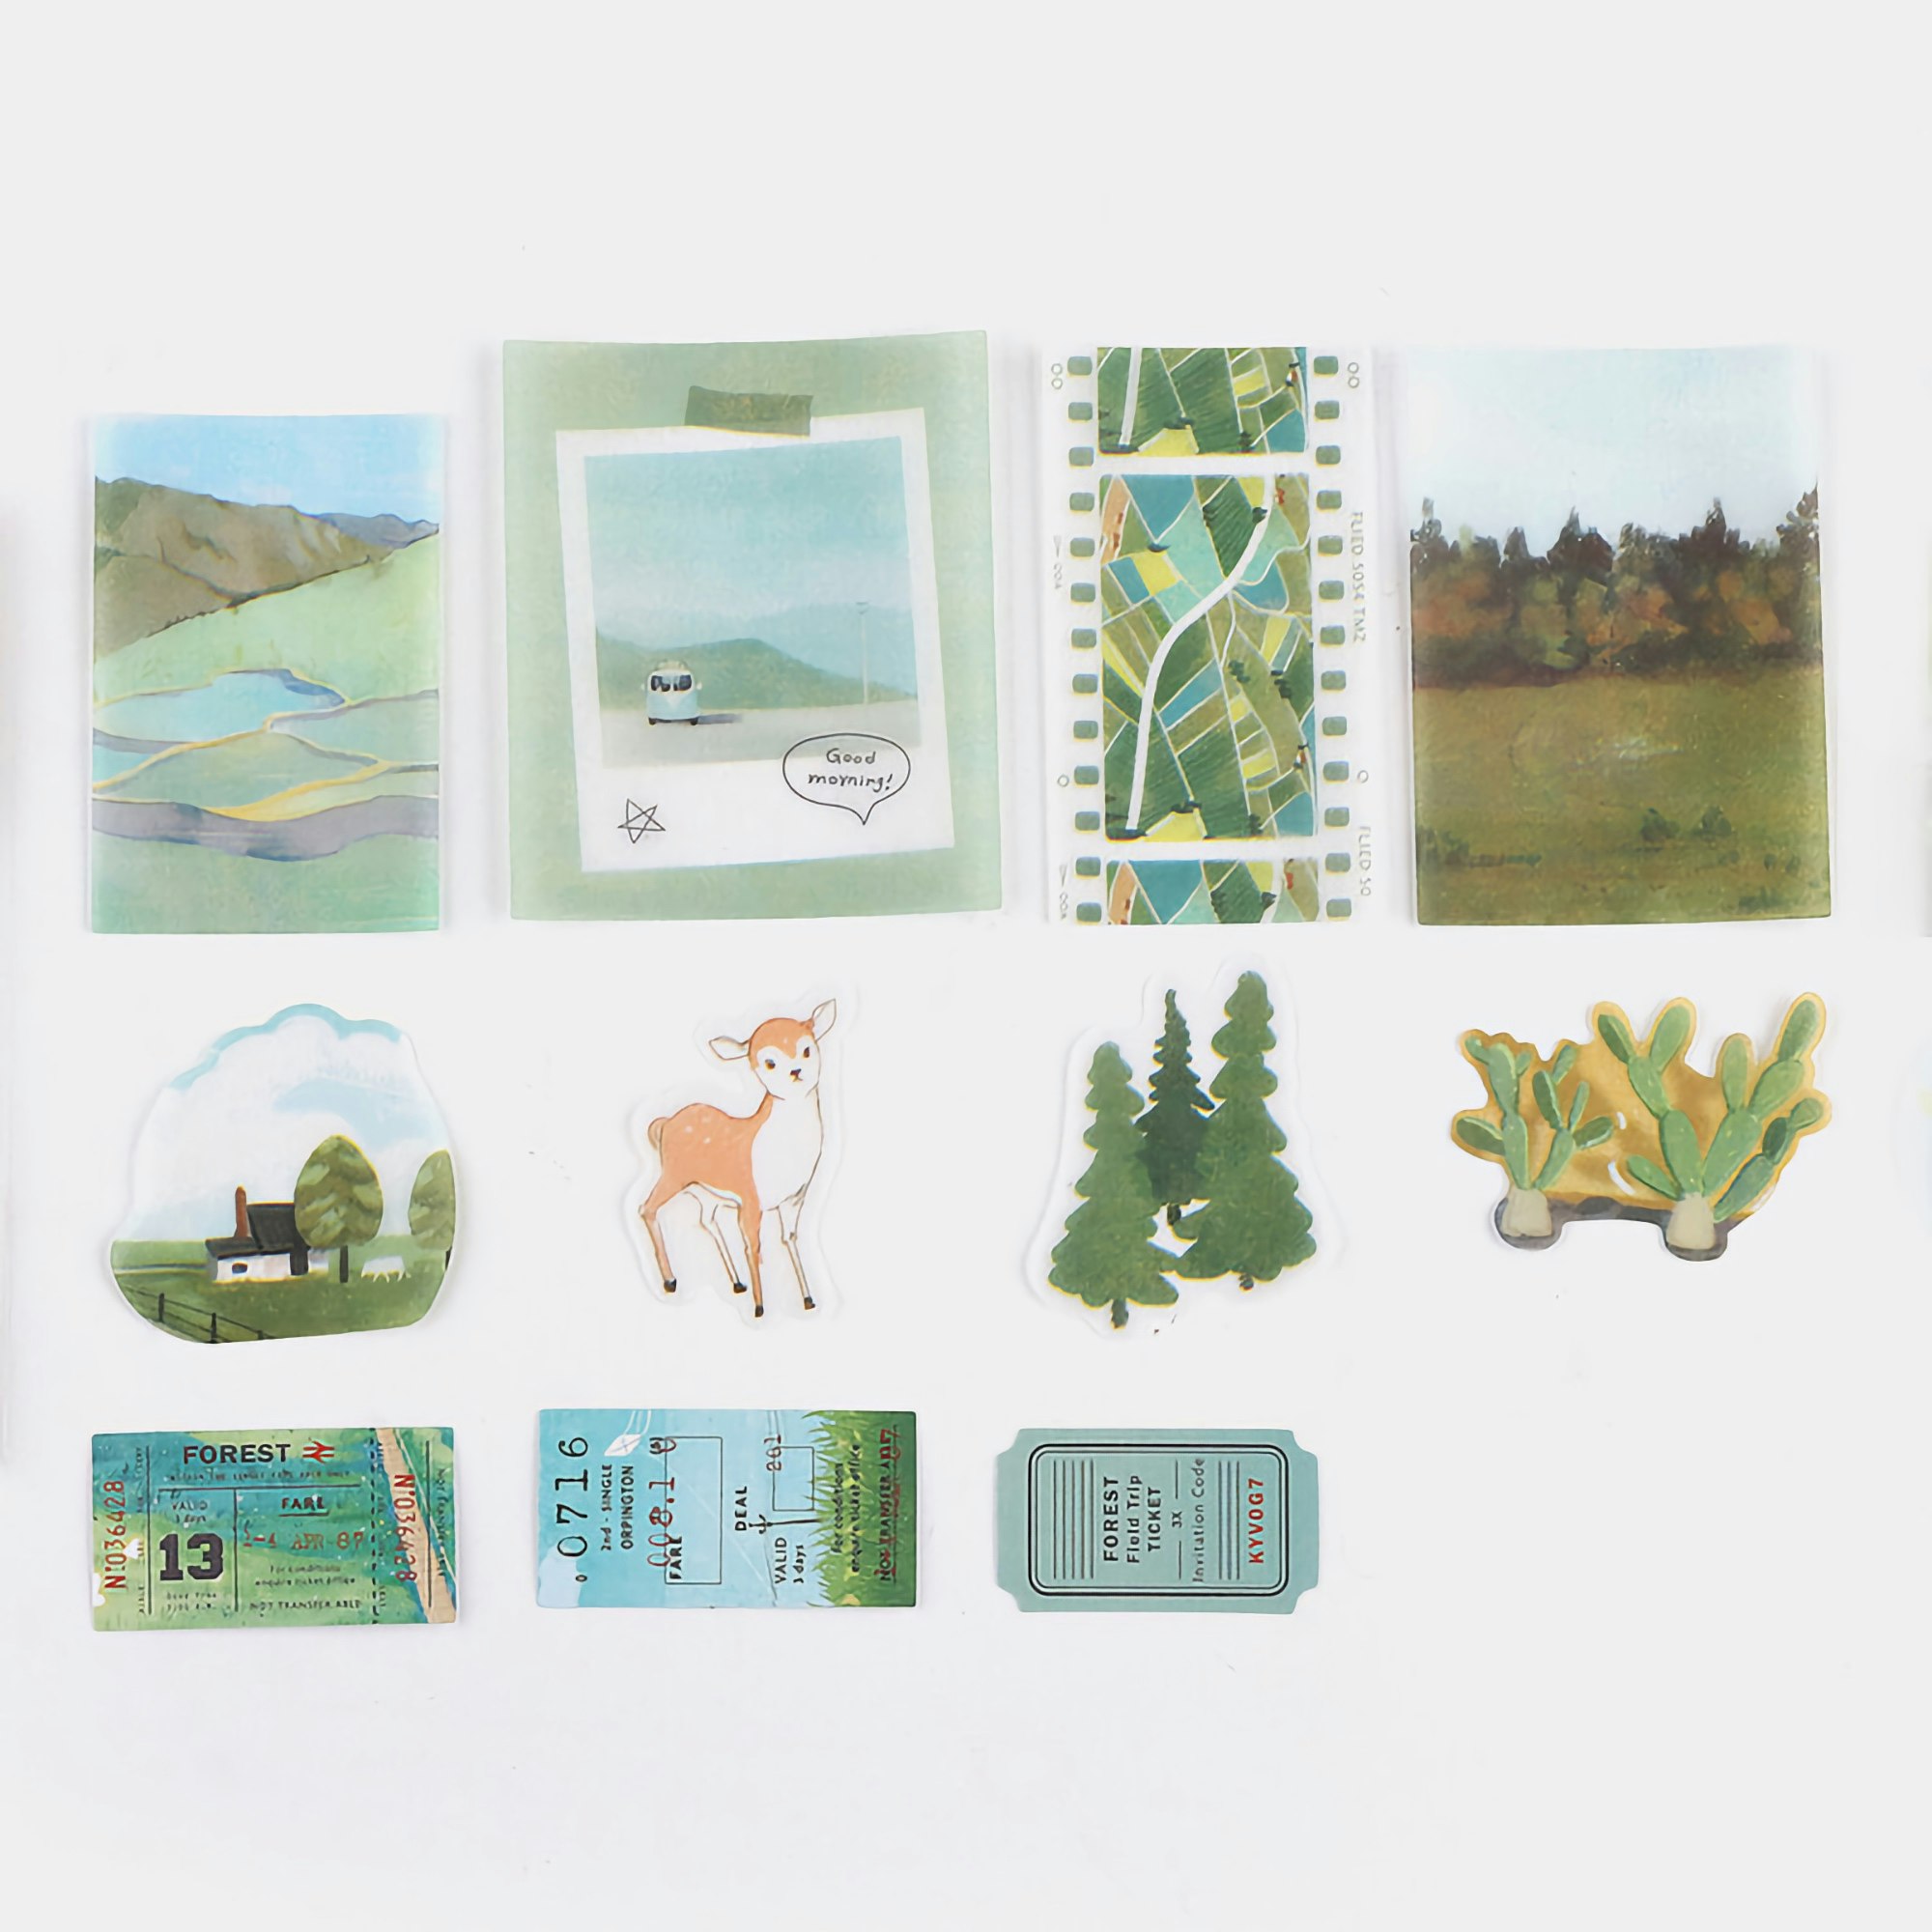 BGM Flake Stickers Travel Diary / Forest Tracing Paper